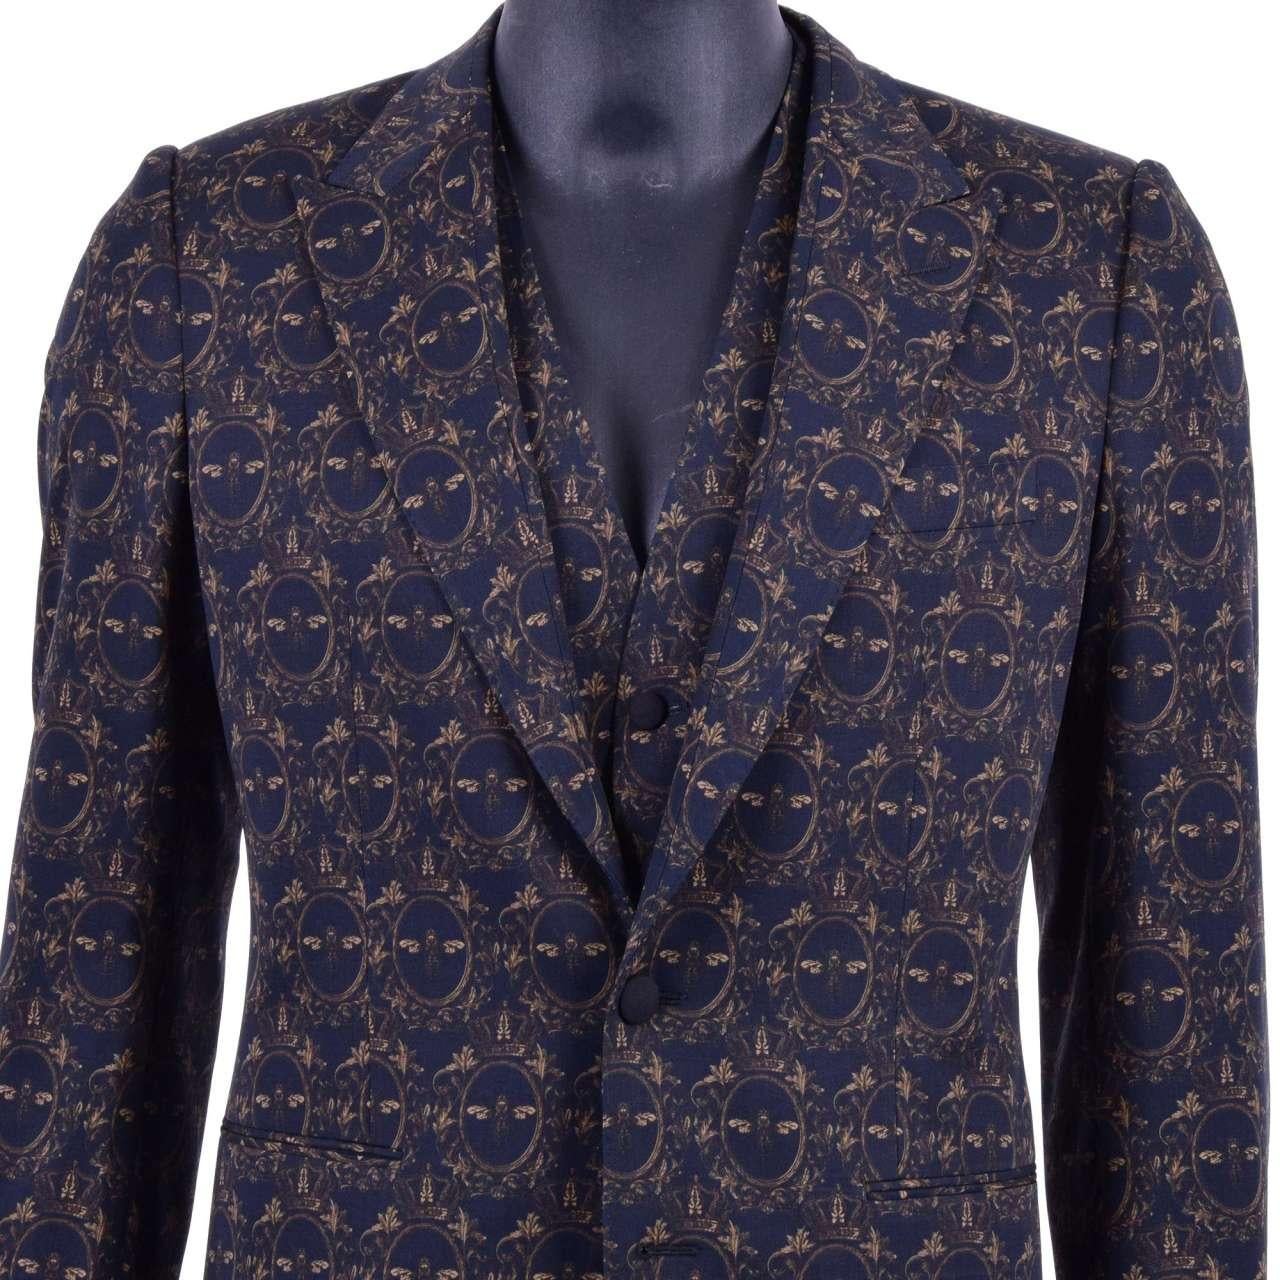 Dolce & Gabbana - 3-Pieces Bee Crown Suit Blue Gold 54 For Sale 1